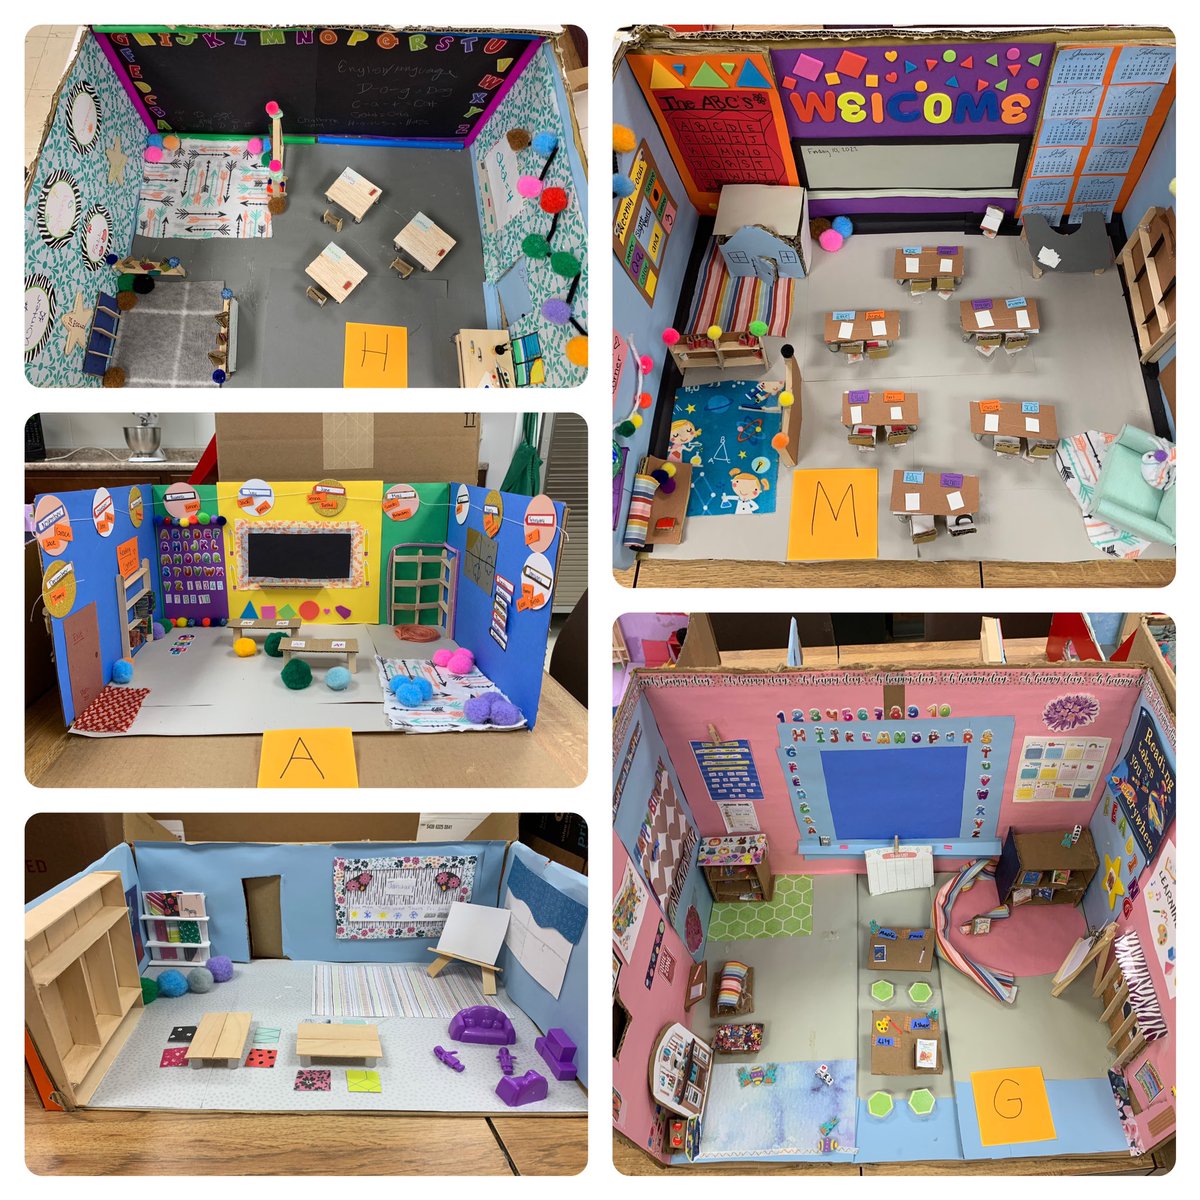 Here are a few of the “classrooms” that were created in boxes by my Principles of Early Childhood Education Class. Great job everyone! #FCS #WDPride #elementaryeducation #earlychildhood #teachers